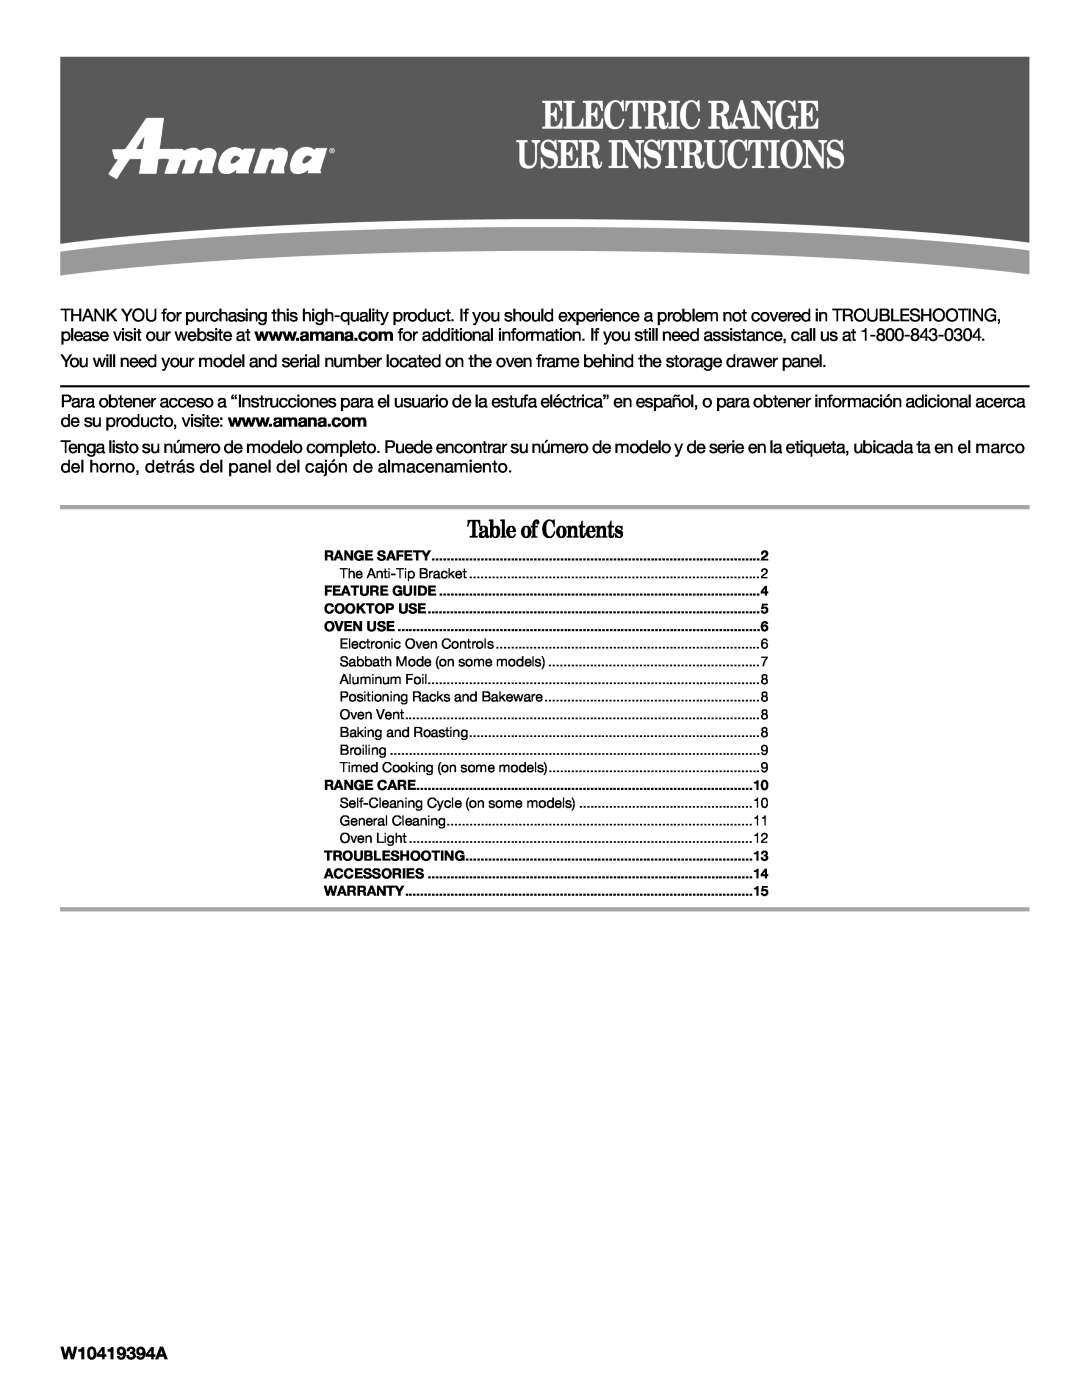 Amana W10419394A warranty Electric Range User Instructions, Table of Contents 